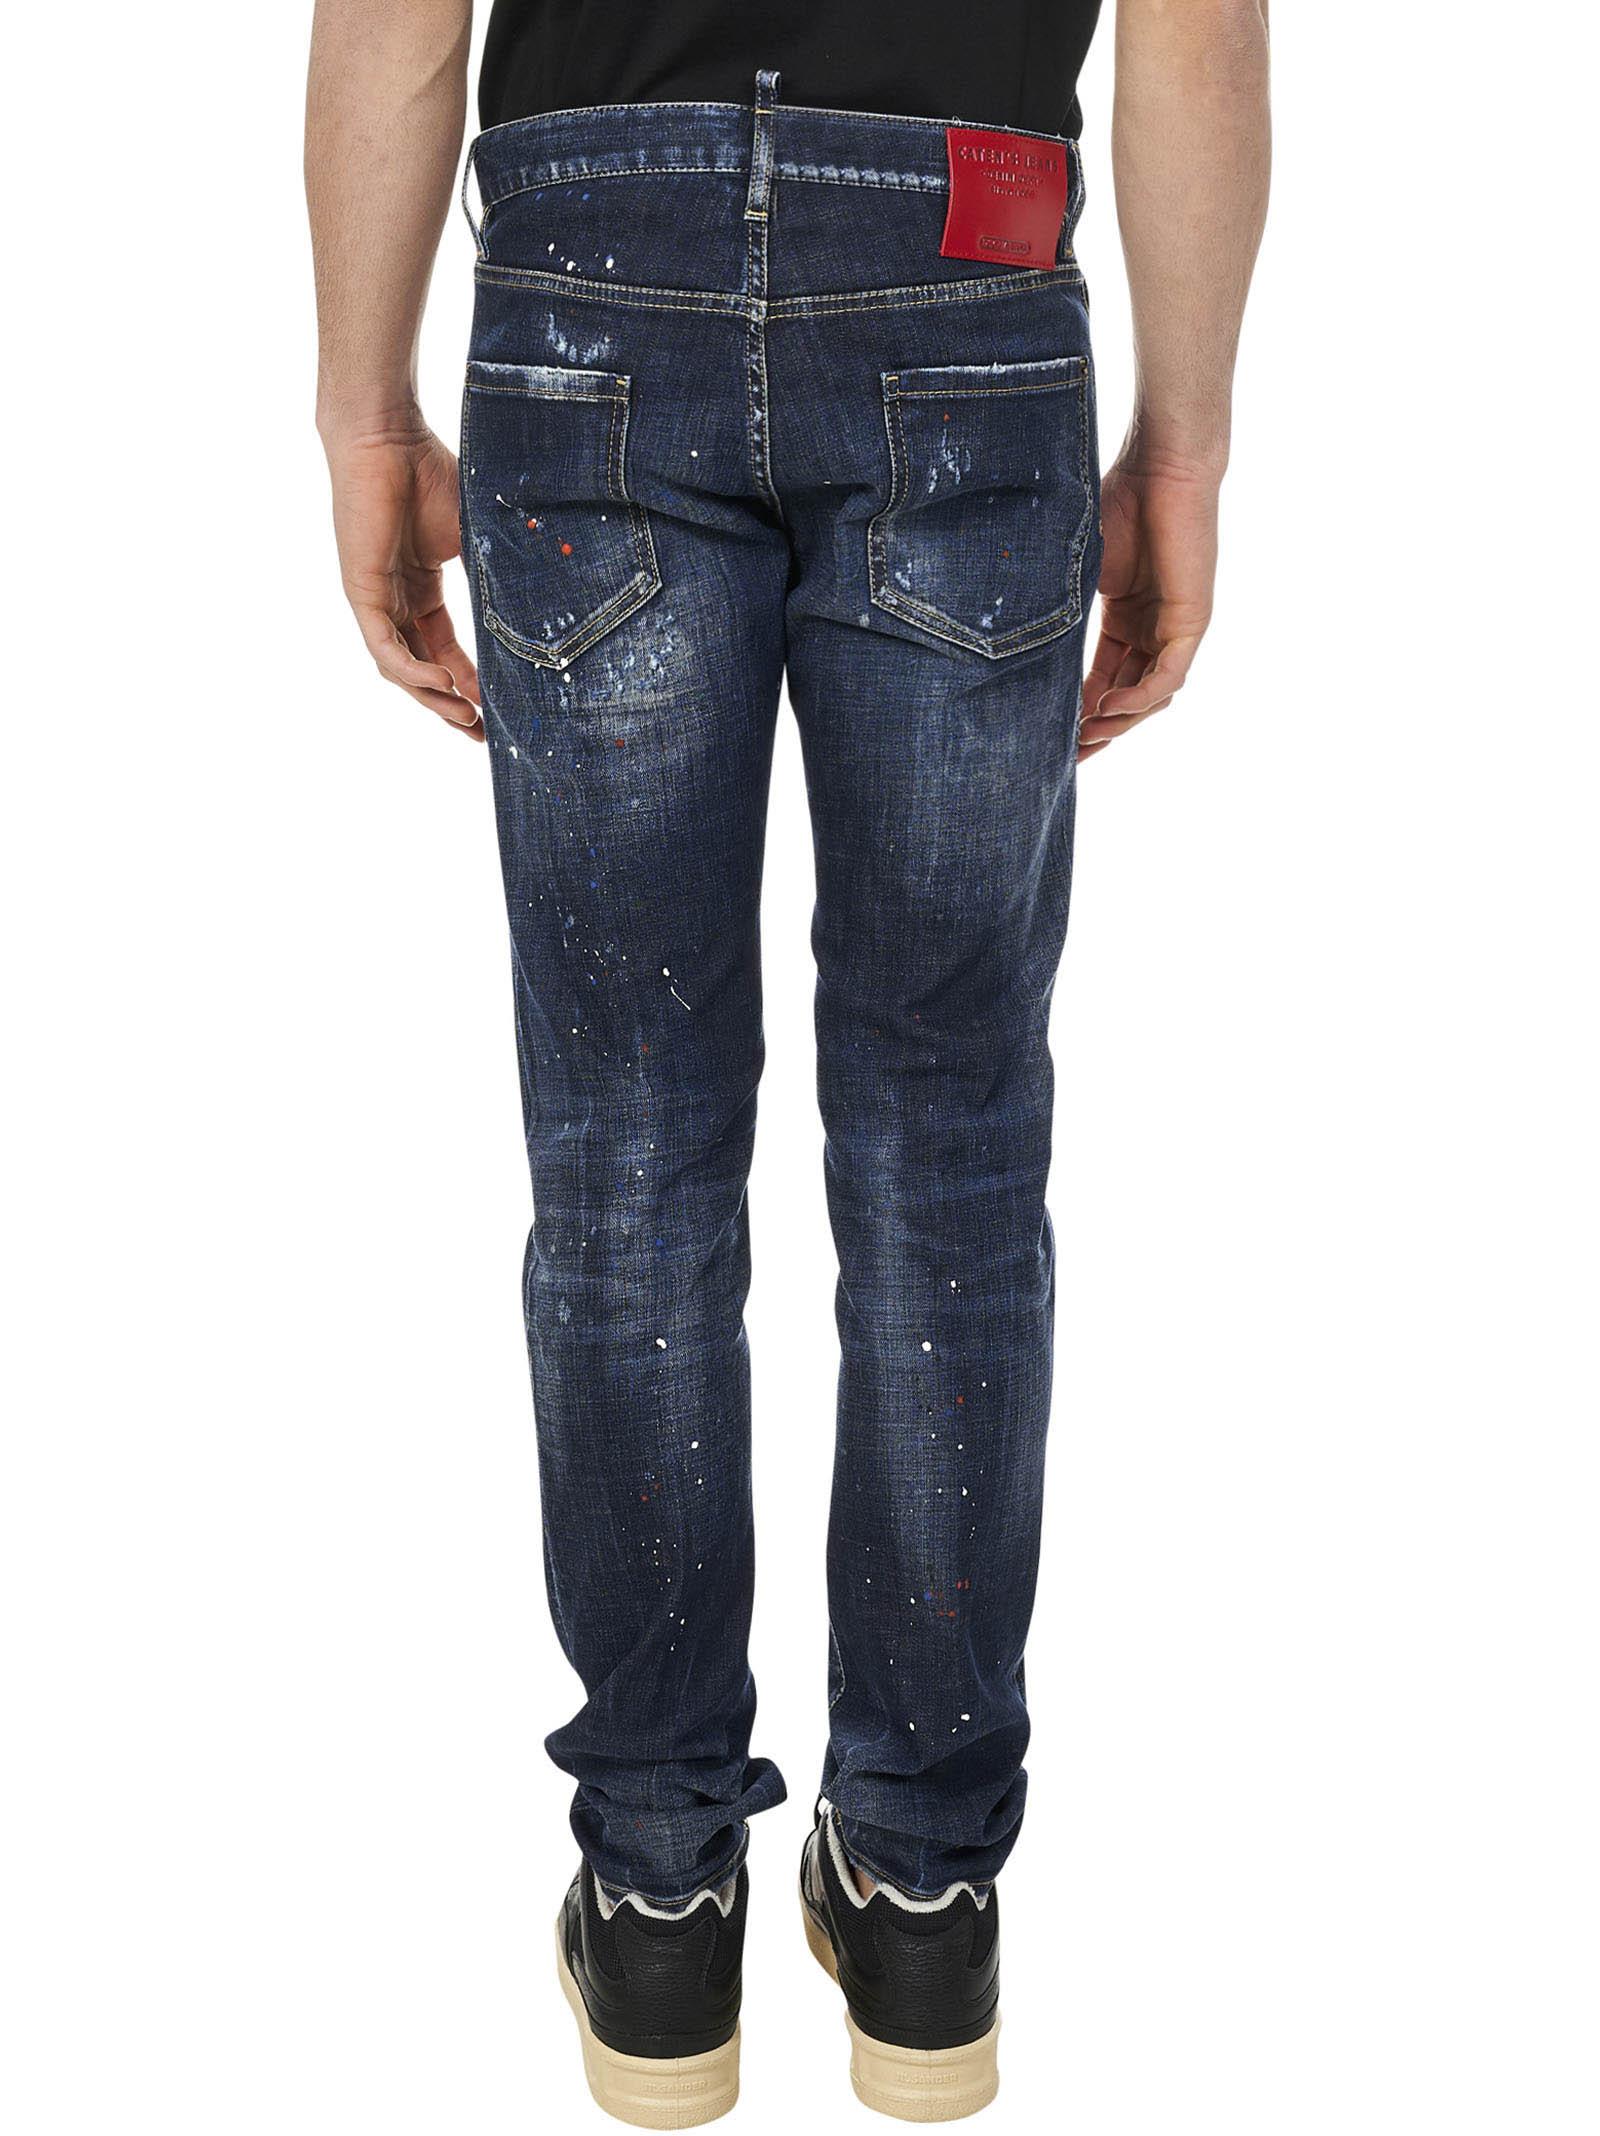 DSquared² Denim Dark Ripped Red & Blue Spots Wash Cool Guy Jeans 